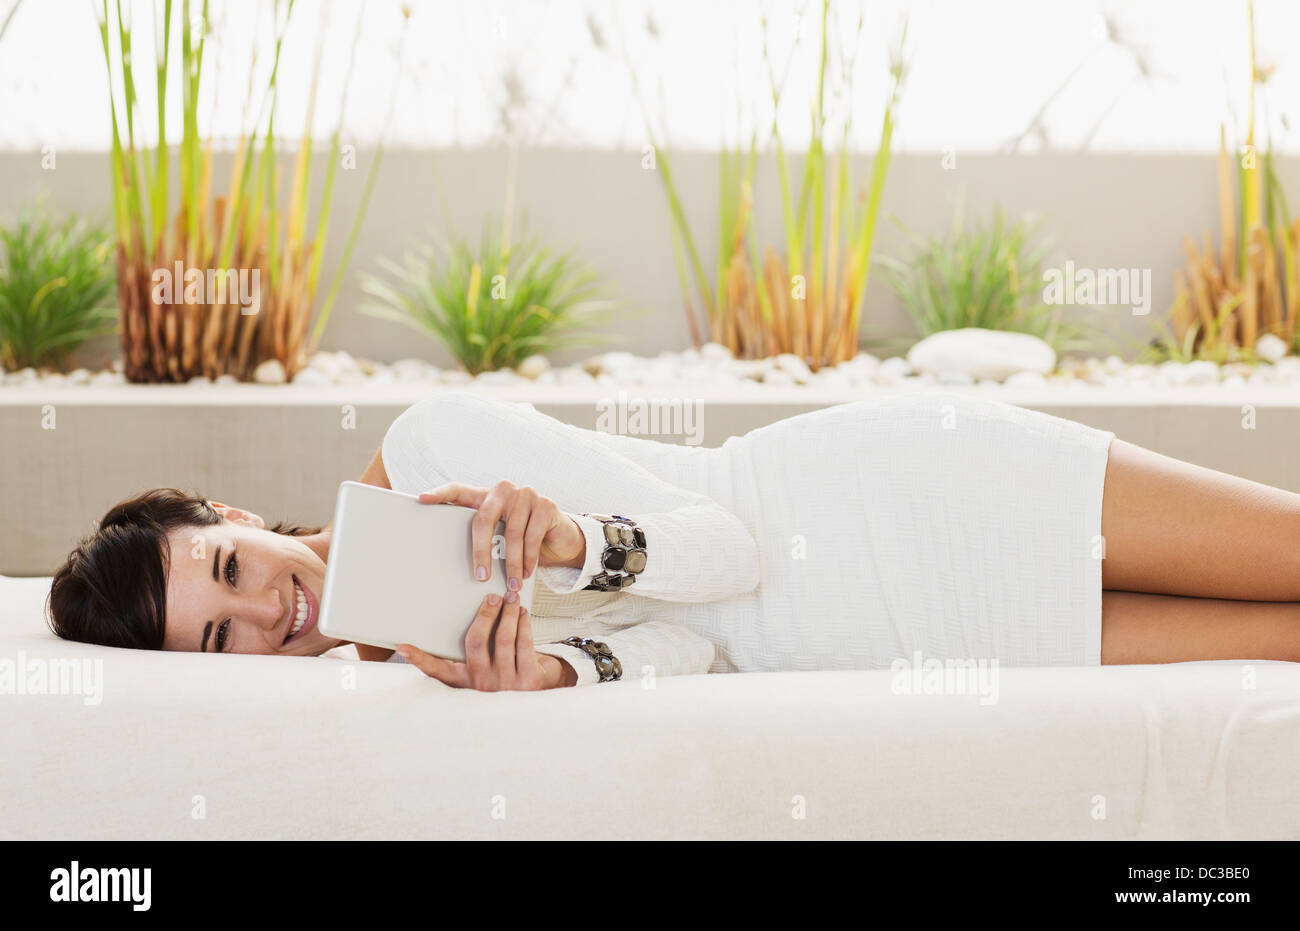 Portrait of smiling woman laying on patio sofa using digital tablet Stock Photo